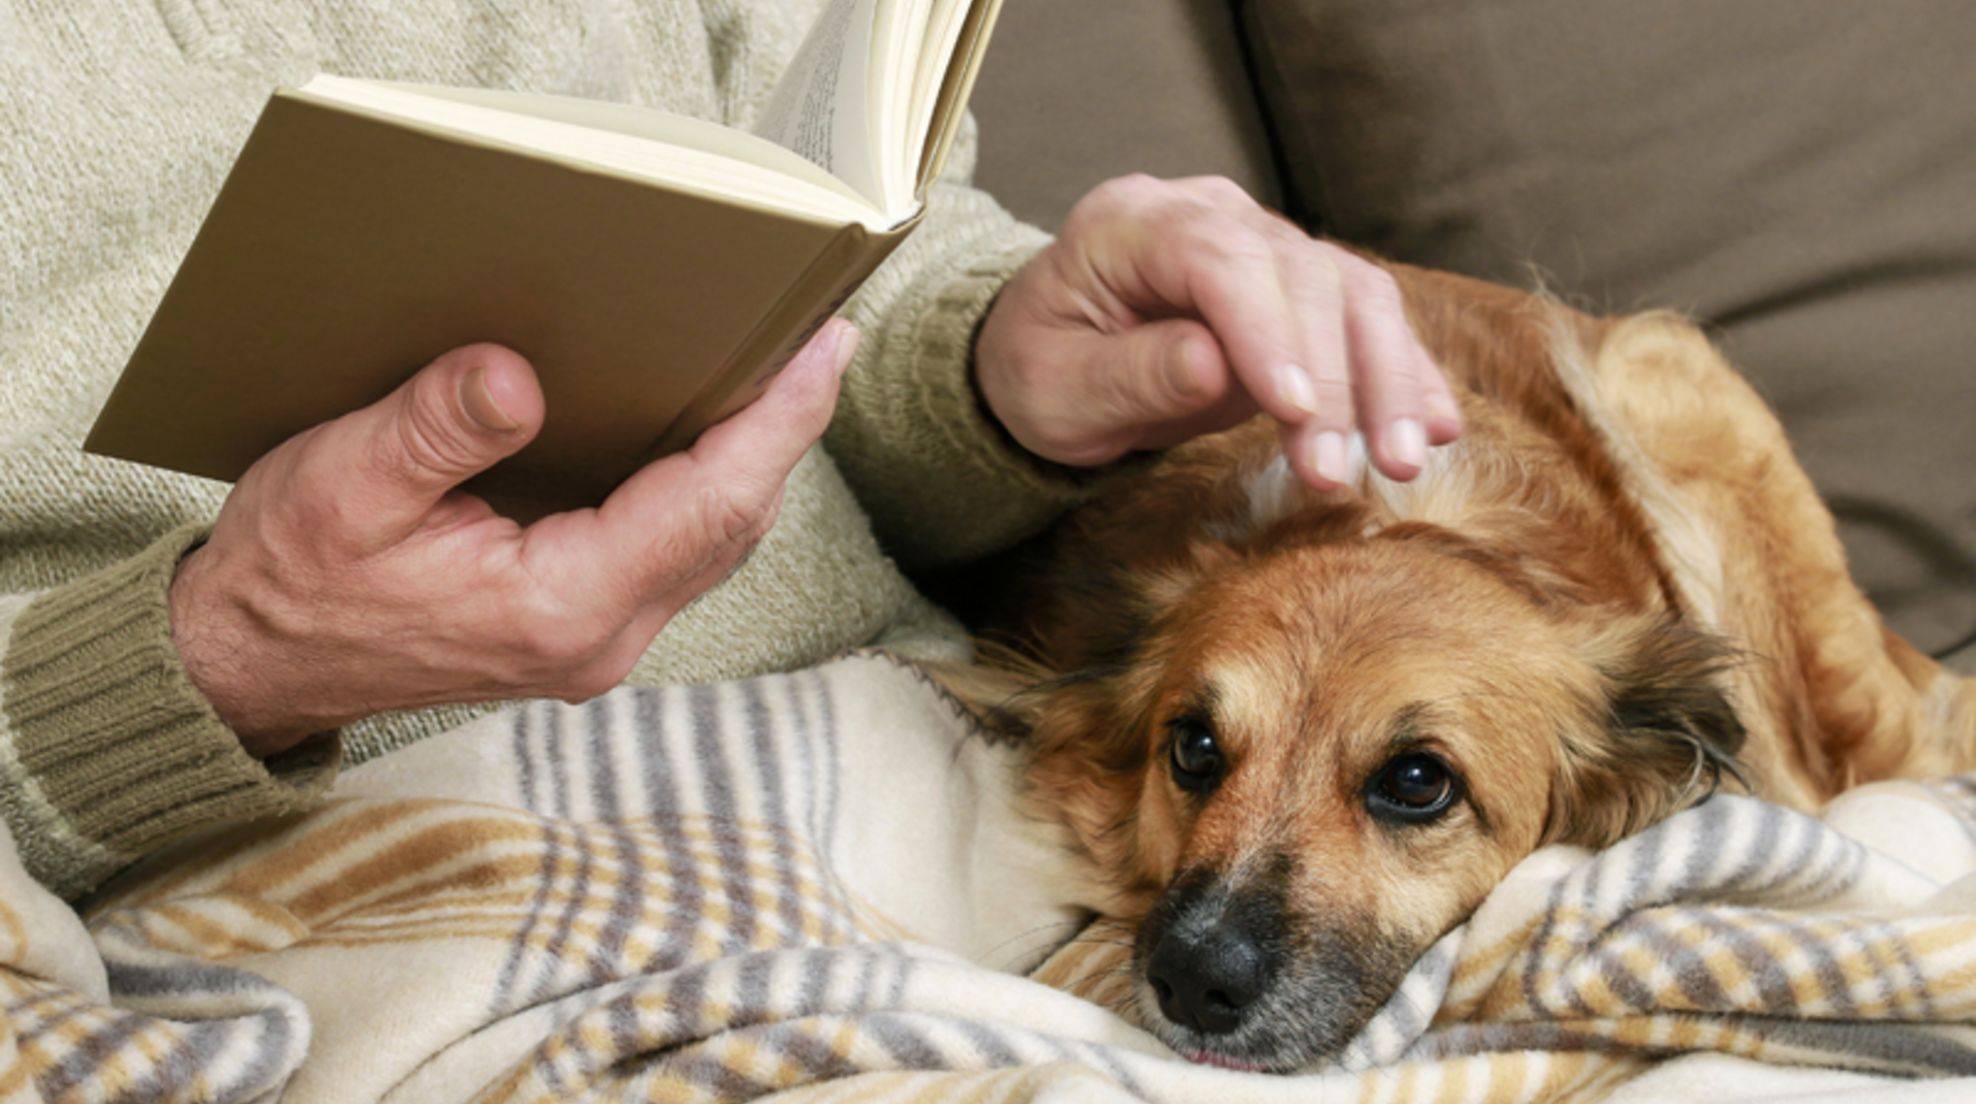 Dogs for old people: Which are the most suitable?